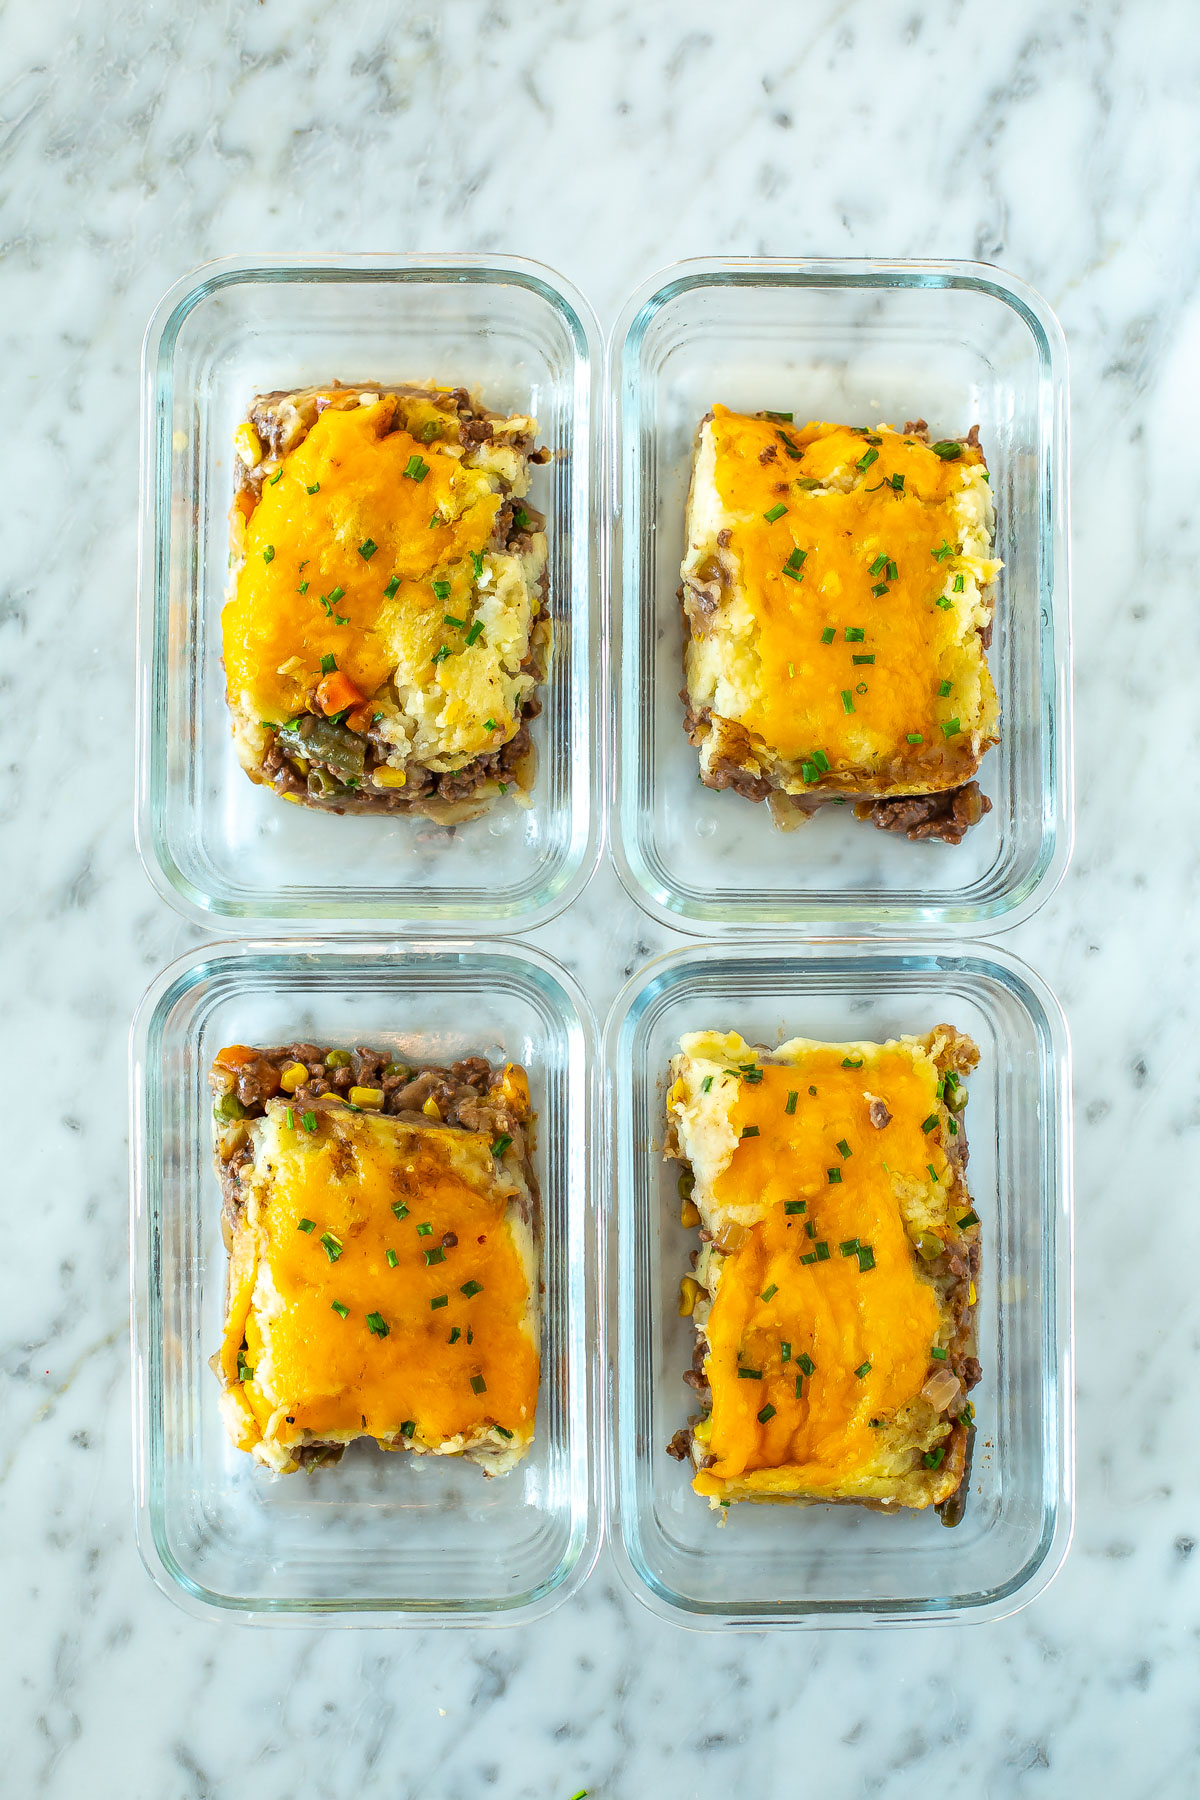 Four meal prep containers, each with a piece of classic shepherd's pie inside.